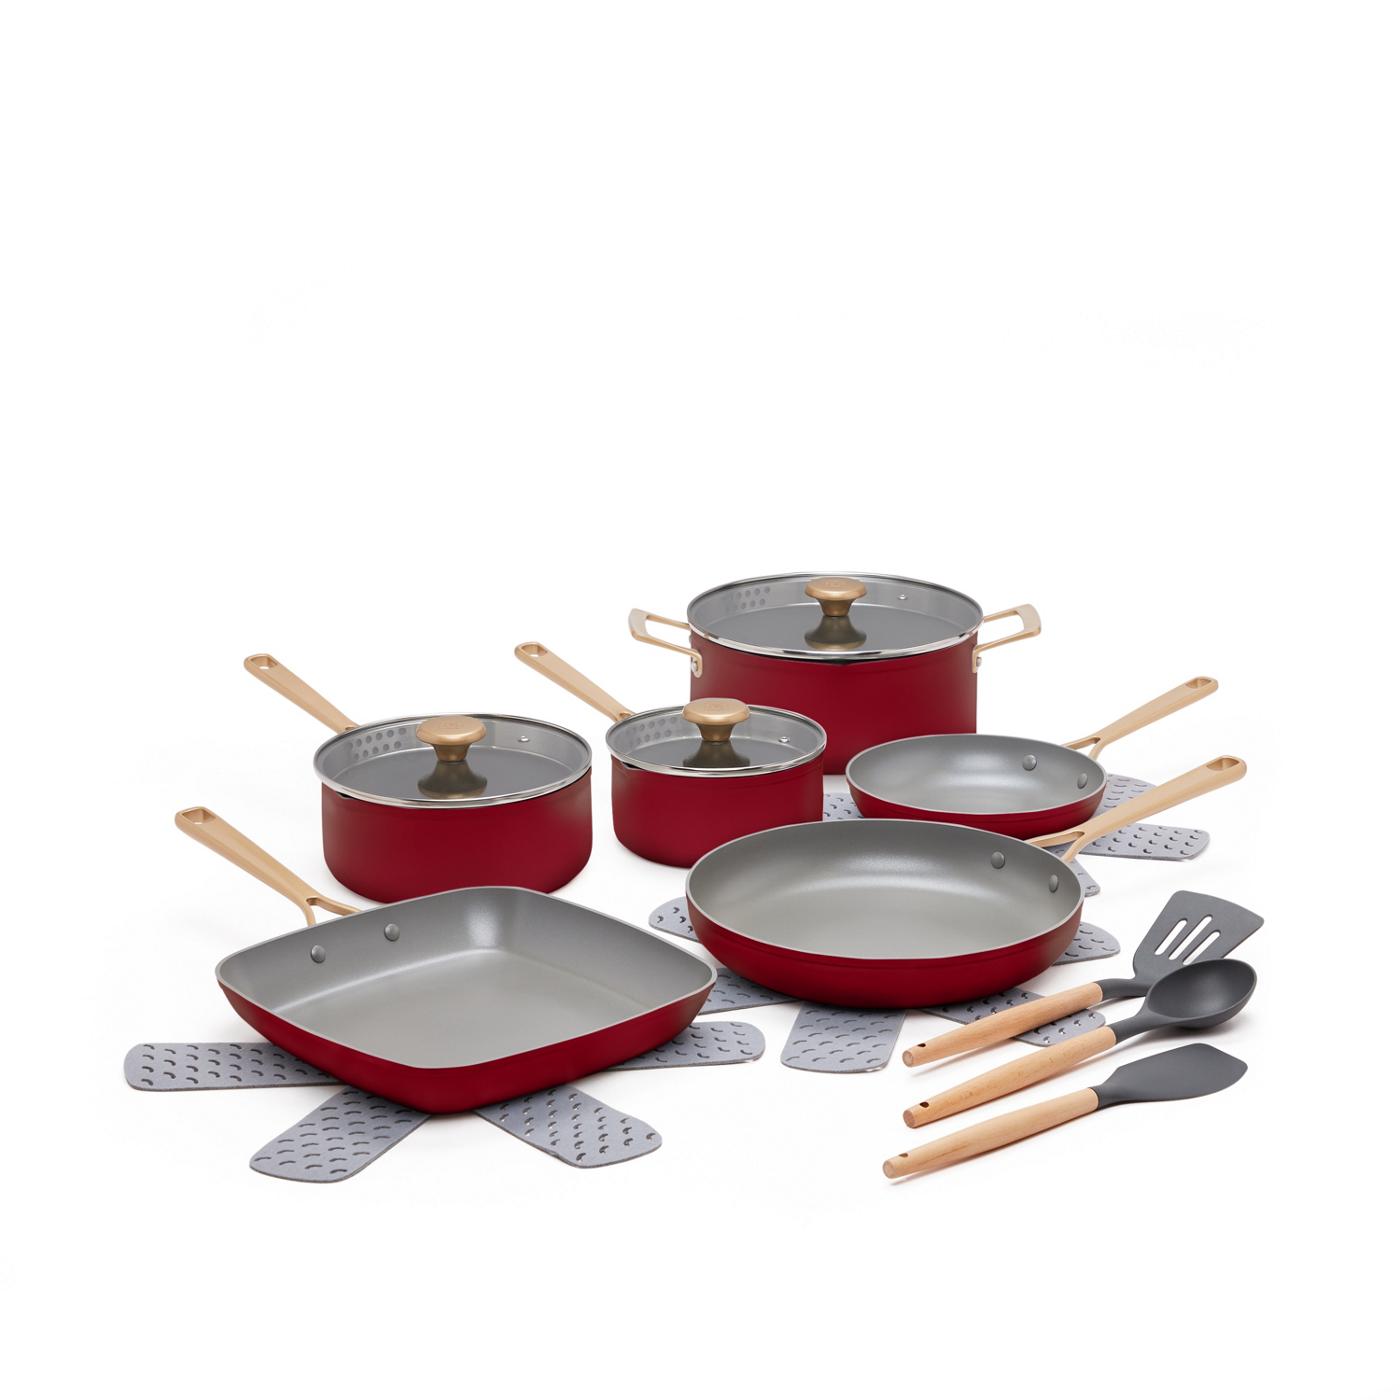 Kitchen & Table by H-E-B Nonstick Cookware Set - Bordeaux Red